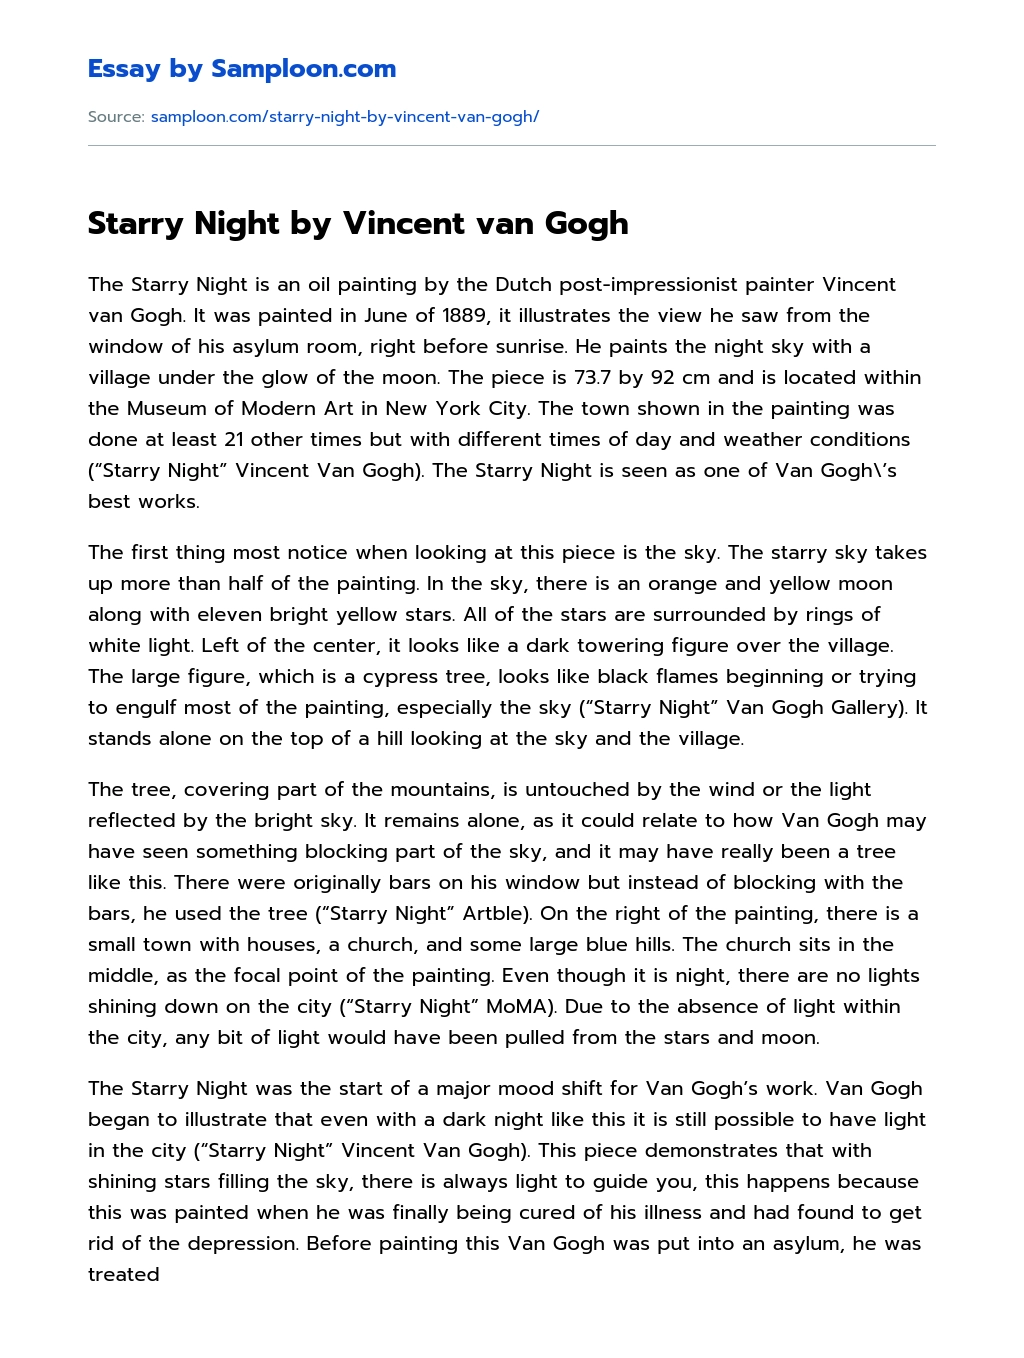 Starry Night by Vincent van Gogh Character Analysis essay